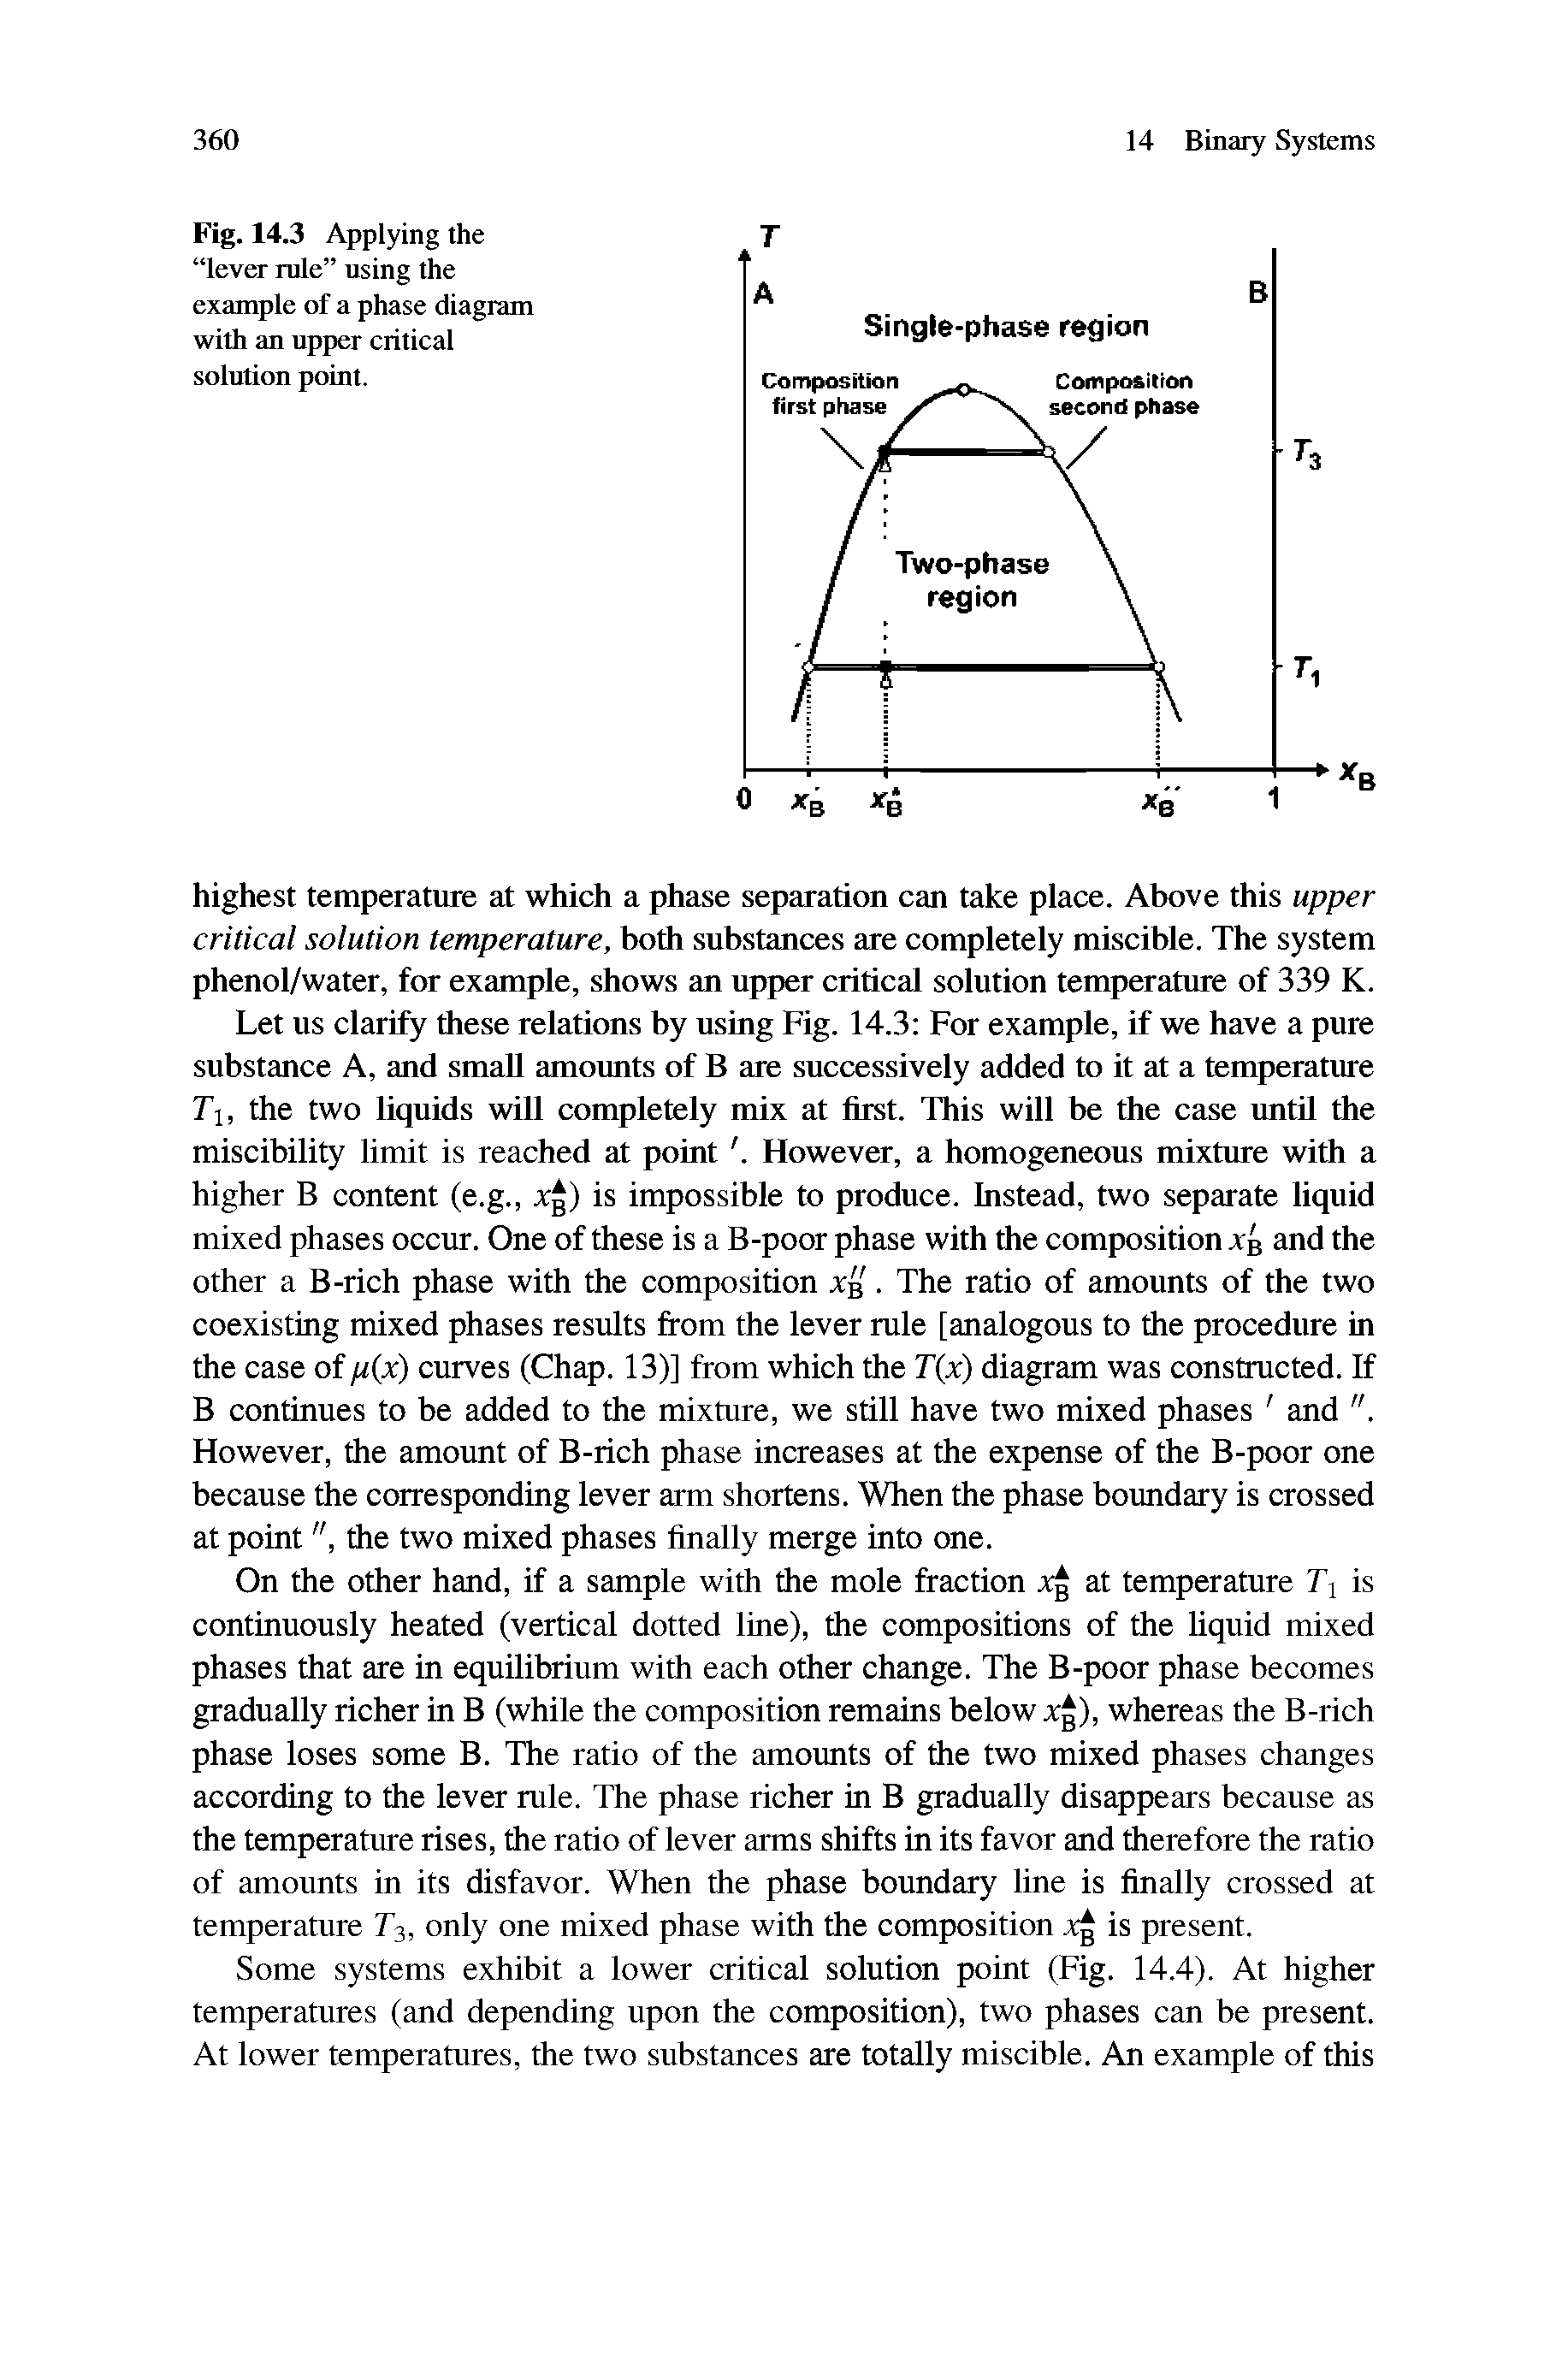 Fig. 14.3 Applying the lever rule using the example of a phase diagram with an upper critical solution point.